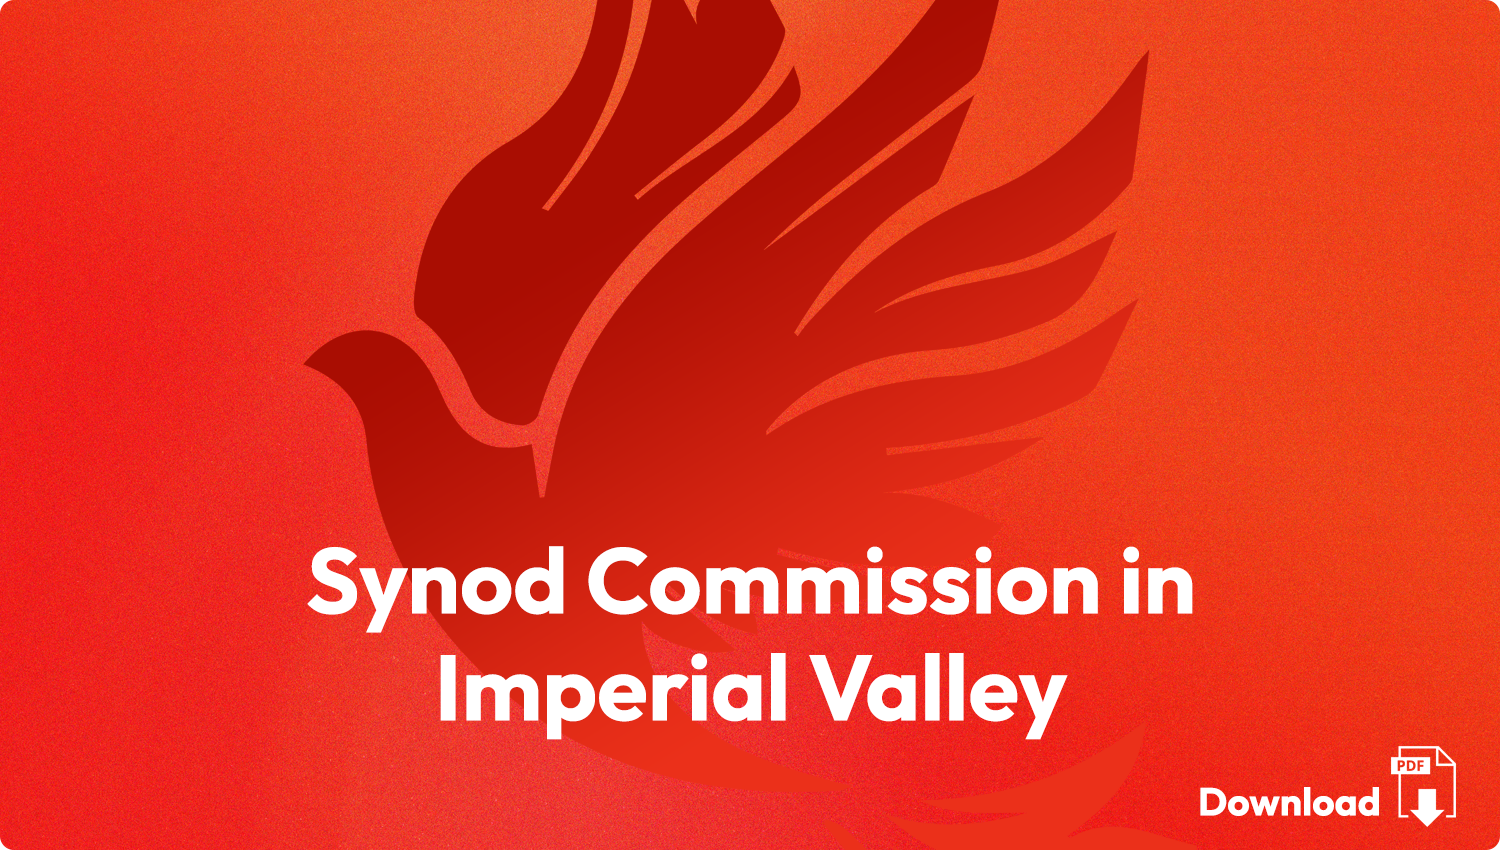 Click here to view the Synod Commision in Imperial Valley